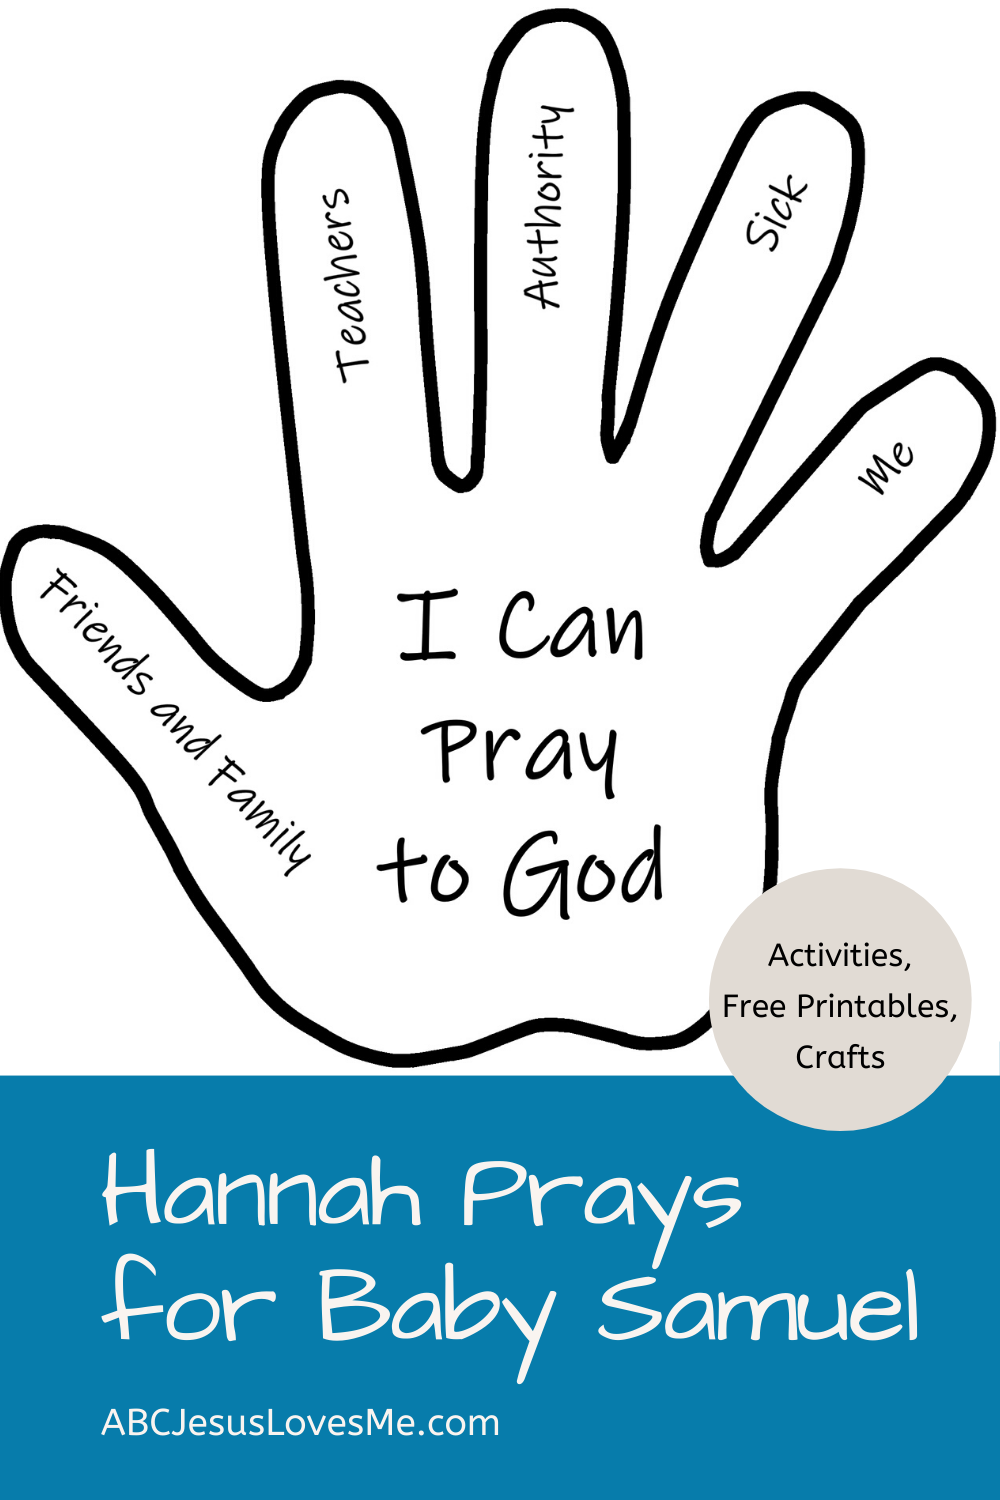 Hannah And Baby Samuel Activities Crafts And FREE Printables ABCJesusLovesMe Bible Lessons For Kids Toddler Bible Lessons Preschool Bible Lessons